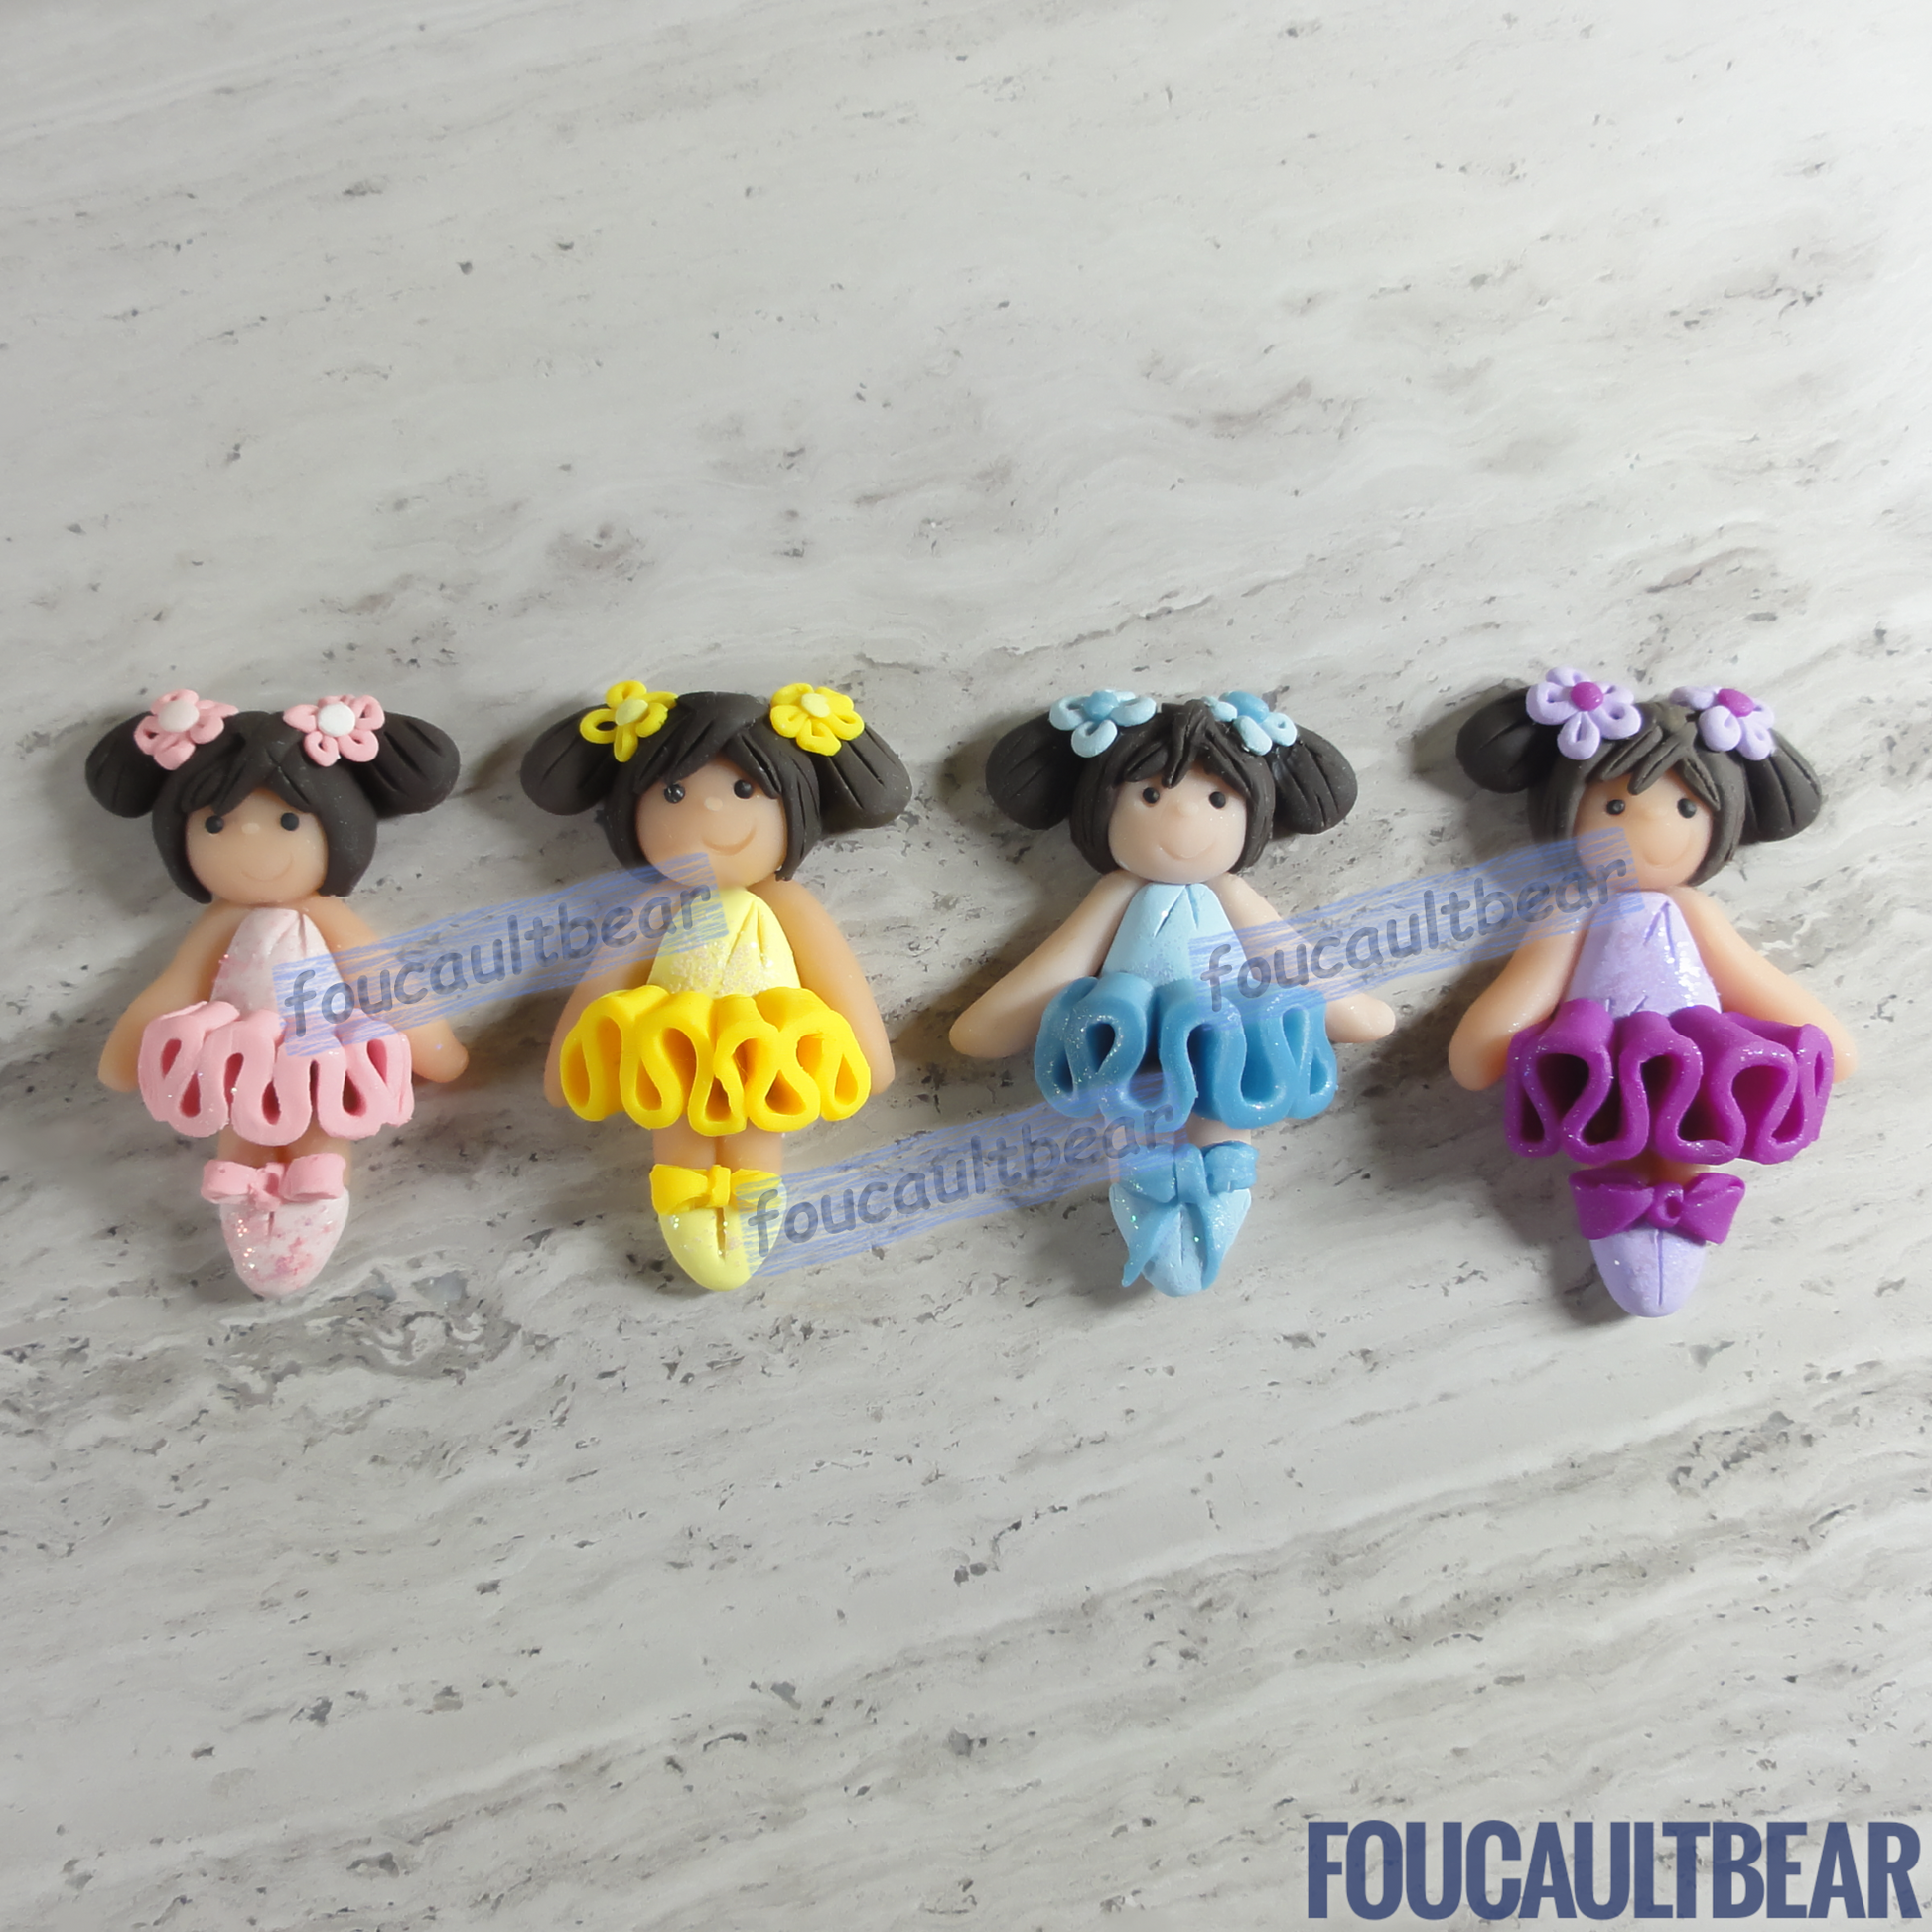 Foucaultbear's HANDMADE CLAY ART FLATBACK. Small Ballerina Girl in Tutu - Pink, Yellow, Blue or Purple. Handmade Polymer Clay Art. For Your Own Creative Use, such as on Hair Bow Barrette Clips, Picture Frames and Refrigerator Magnets. This flatback Clay Ballerina/Ballet Girl is in the "Back to Basics" uncomplicated style. Makes for a perfect hair bow barrette clip centerpiece. You have the option of choosing either Pink, Yellow, Blue or Purple. Listing is for ONE Ballerina. 